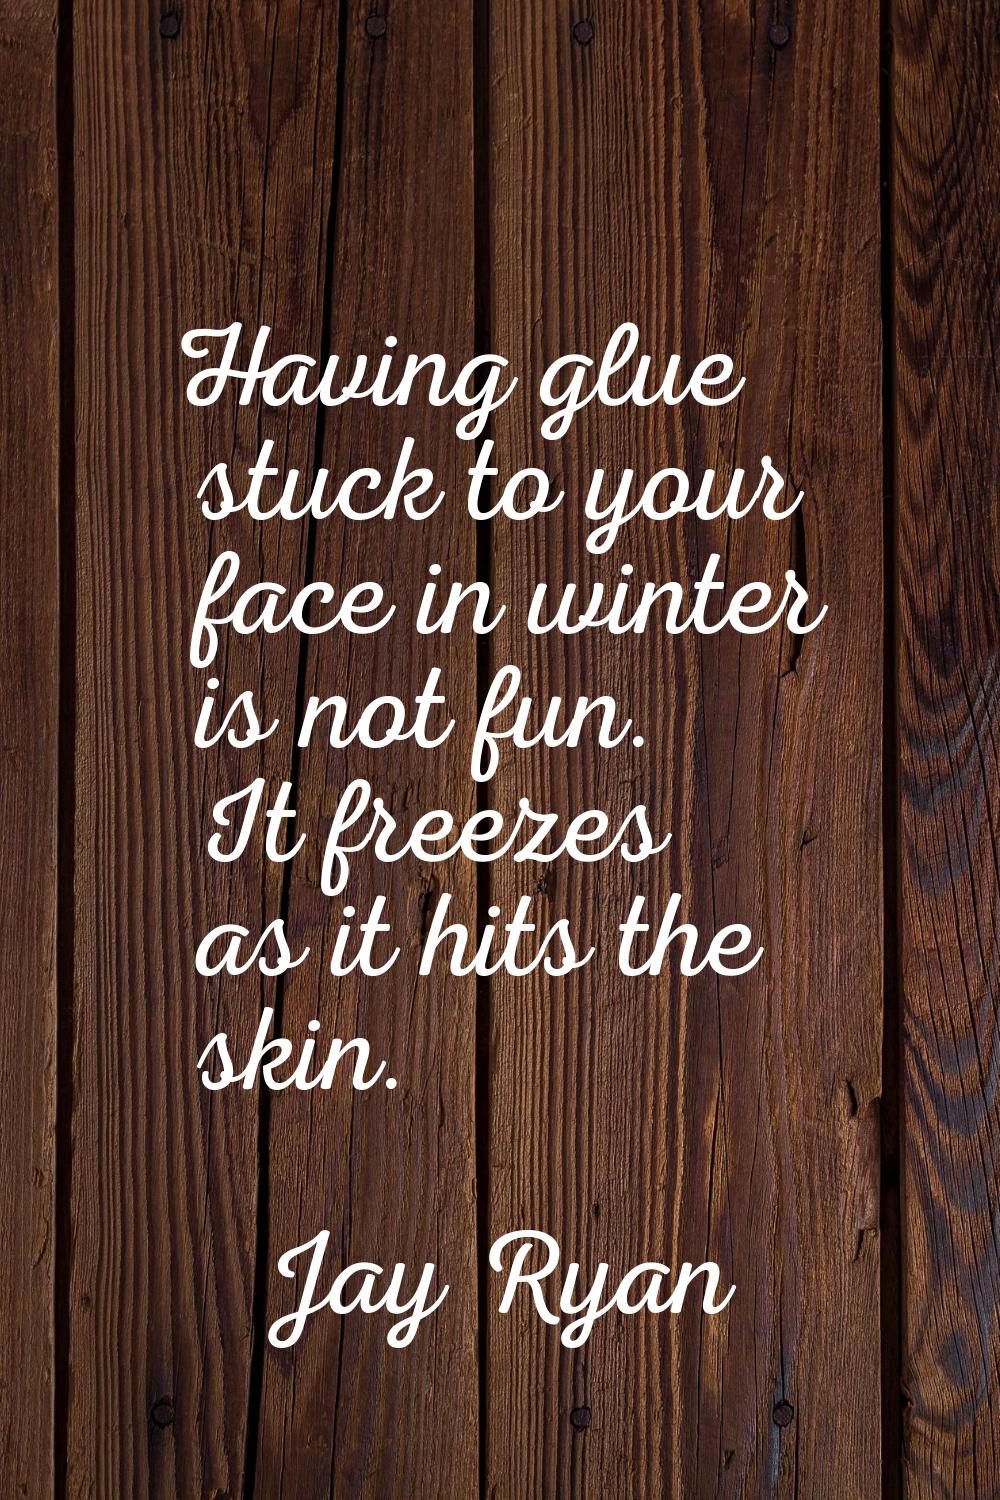 Having glue stuck to your face in winter is not fun. It freezes as it hits the skin.